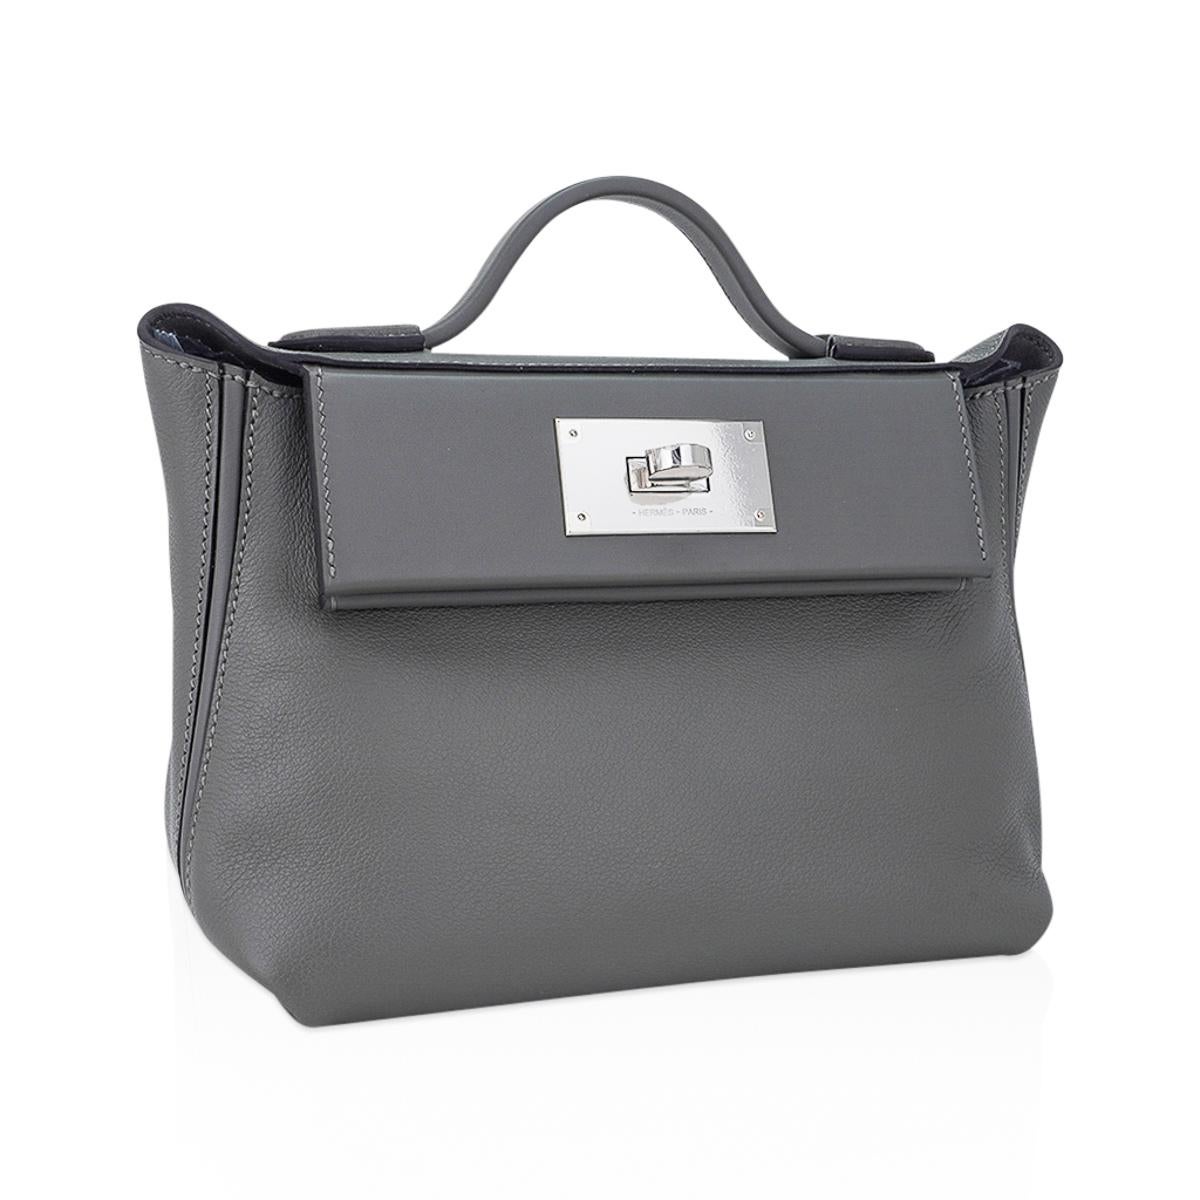 Mightychic offers an Hermes 24/24 21 mini bag featured in Gris Meyer.
Slouchy, chic as has style whether worn as a top handle, shoulder or crossbody bag,
waist bag or backpack.
Perfect chic casual to take to day to evening.
Rear has a slot pocket